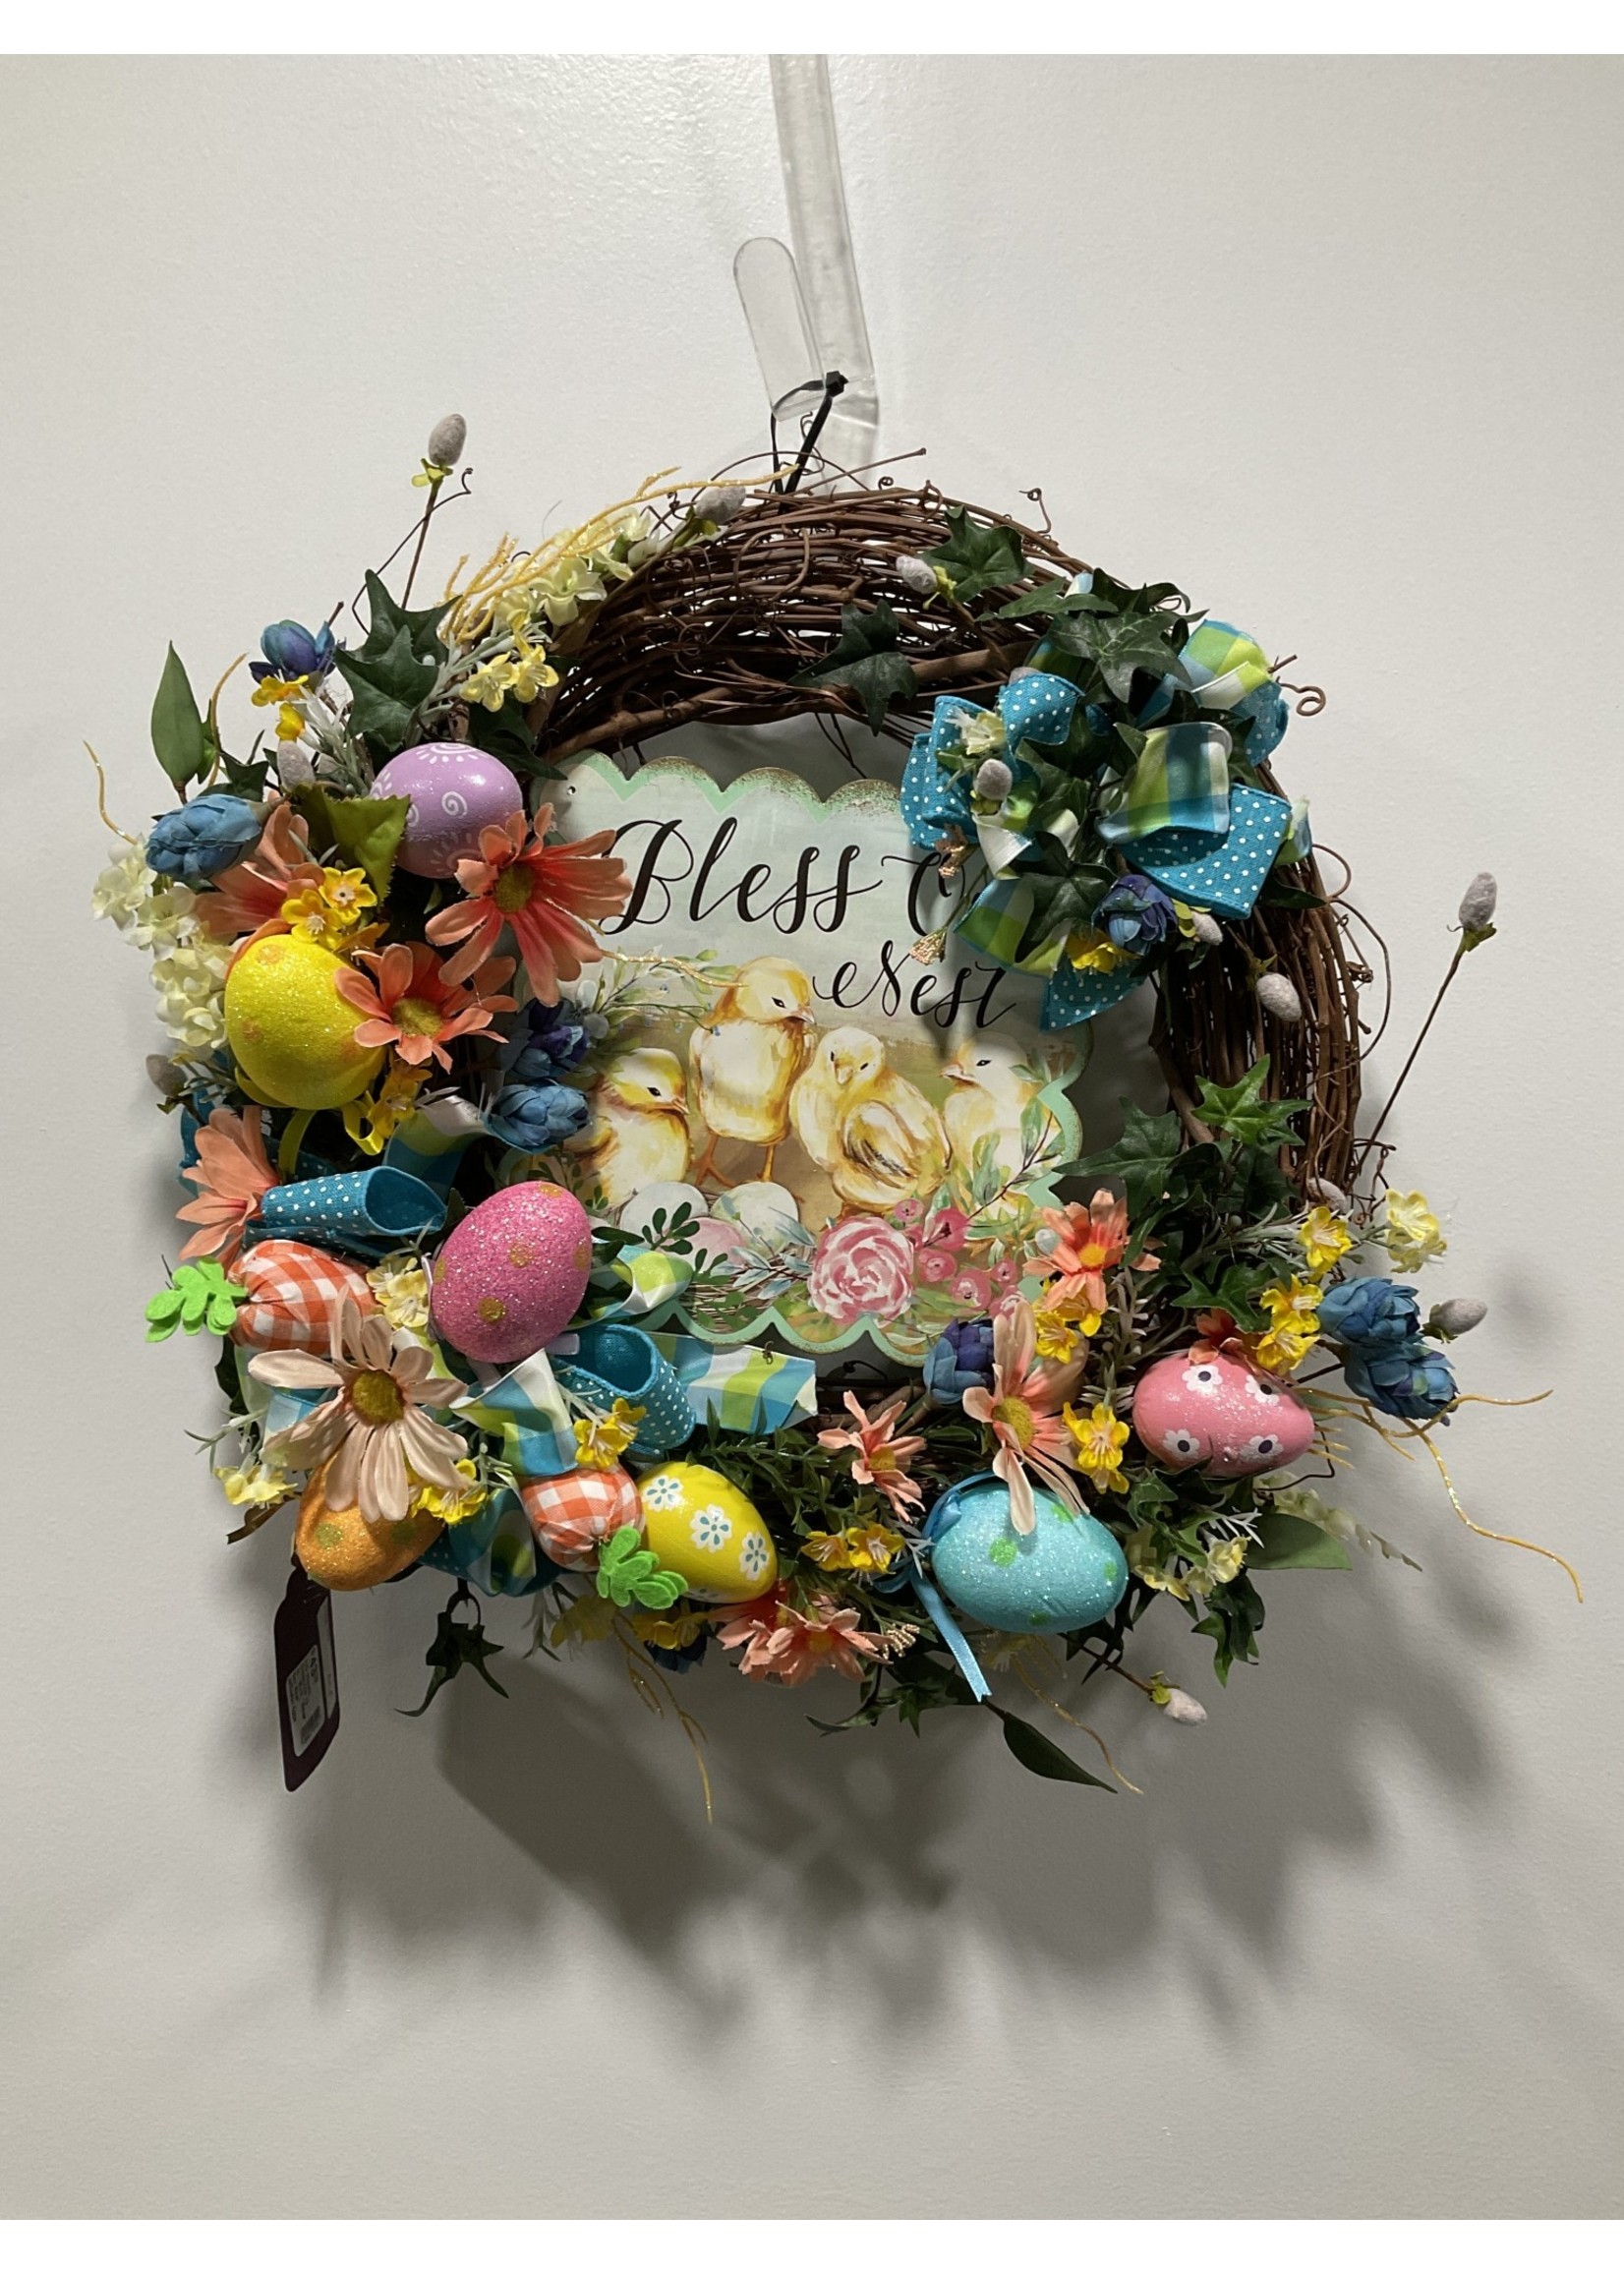 My New Favorite Thing 375 Wreath Grapevine 16 in-Multi "Bless Our Nest" w/Easter Eggs